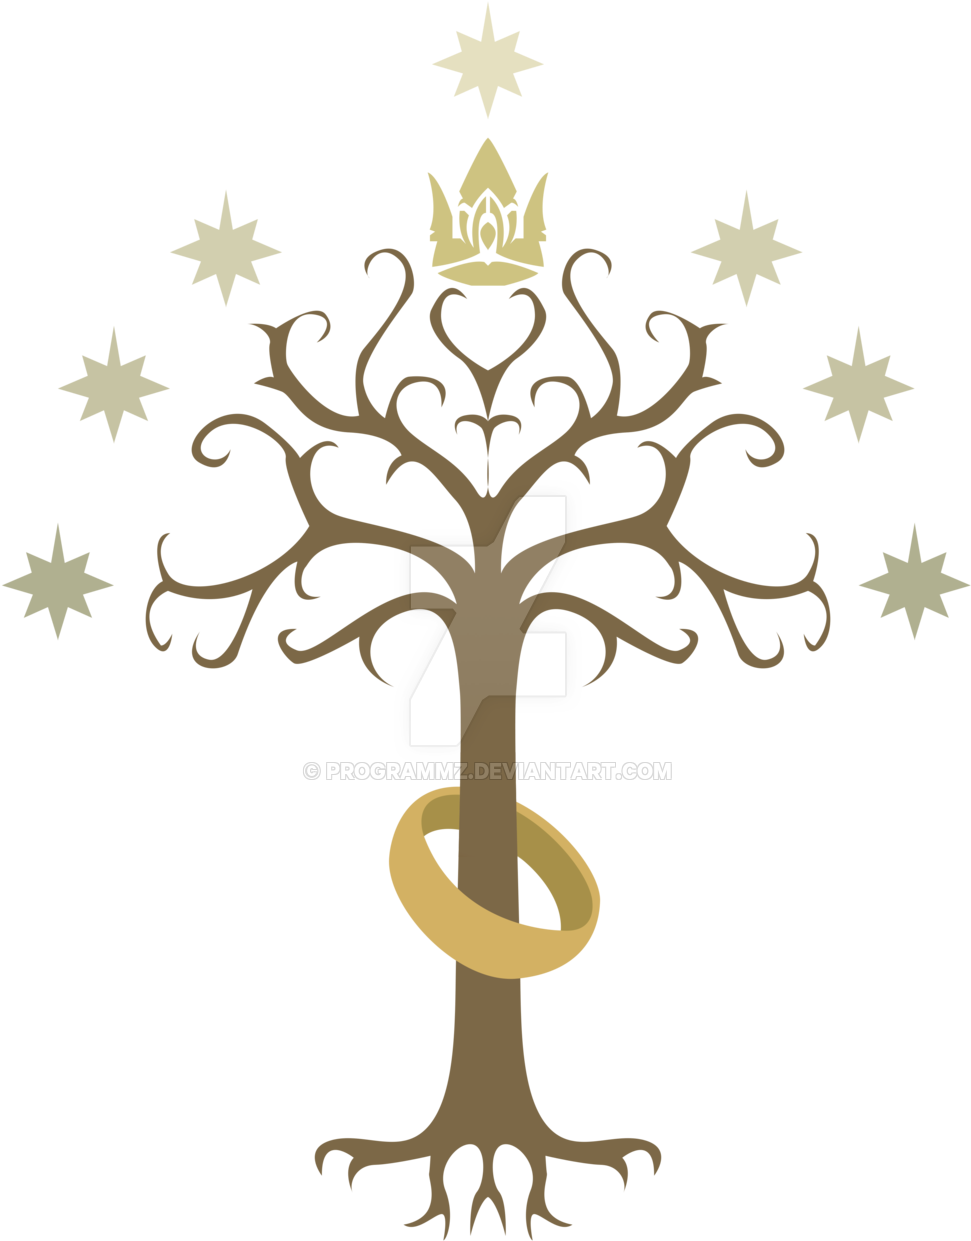 Lord Of The Rings Inspired Tree By Programmz - Tree Lord Of The Ring (1280x1280)